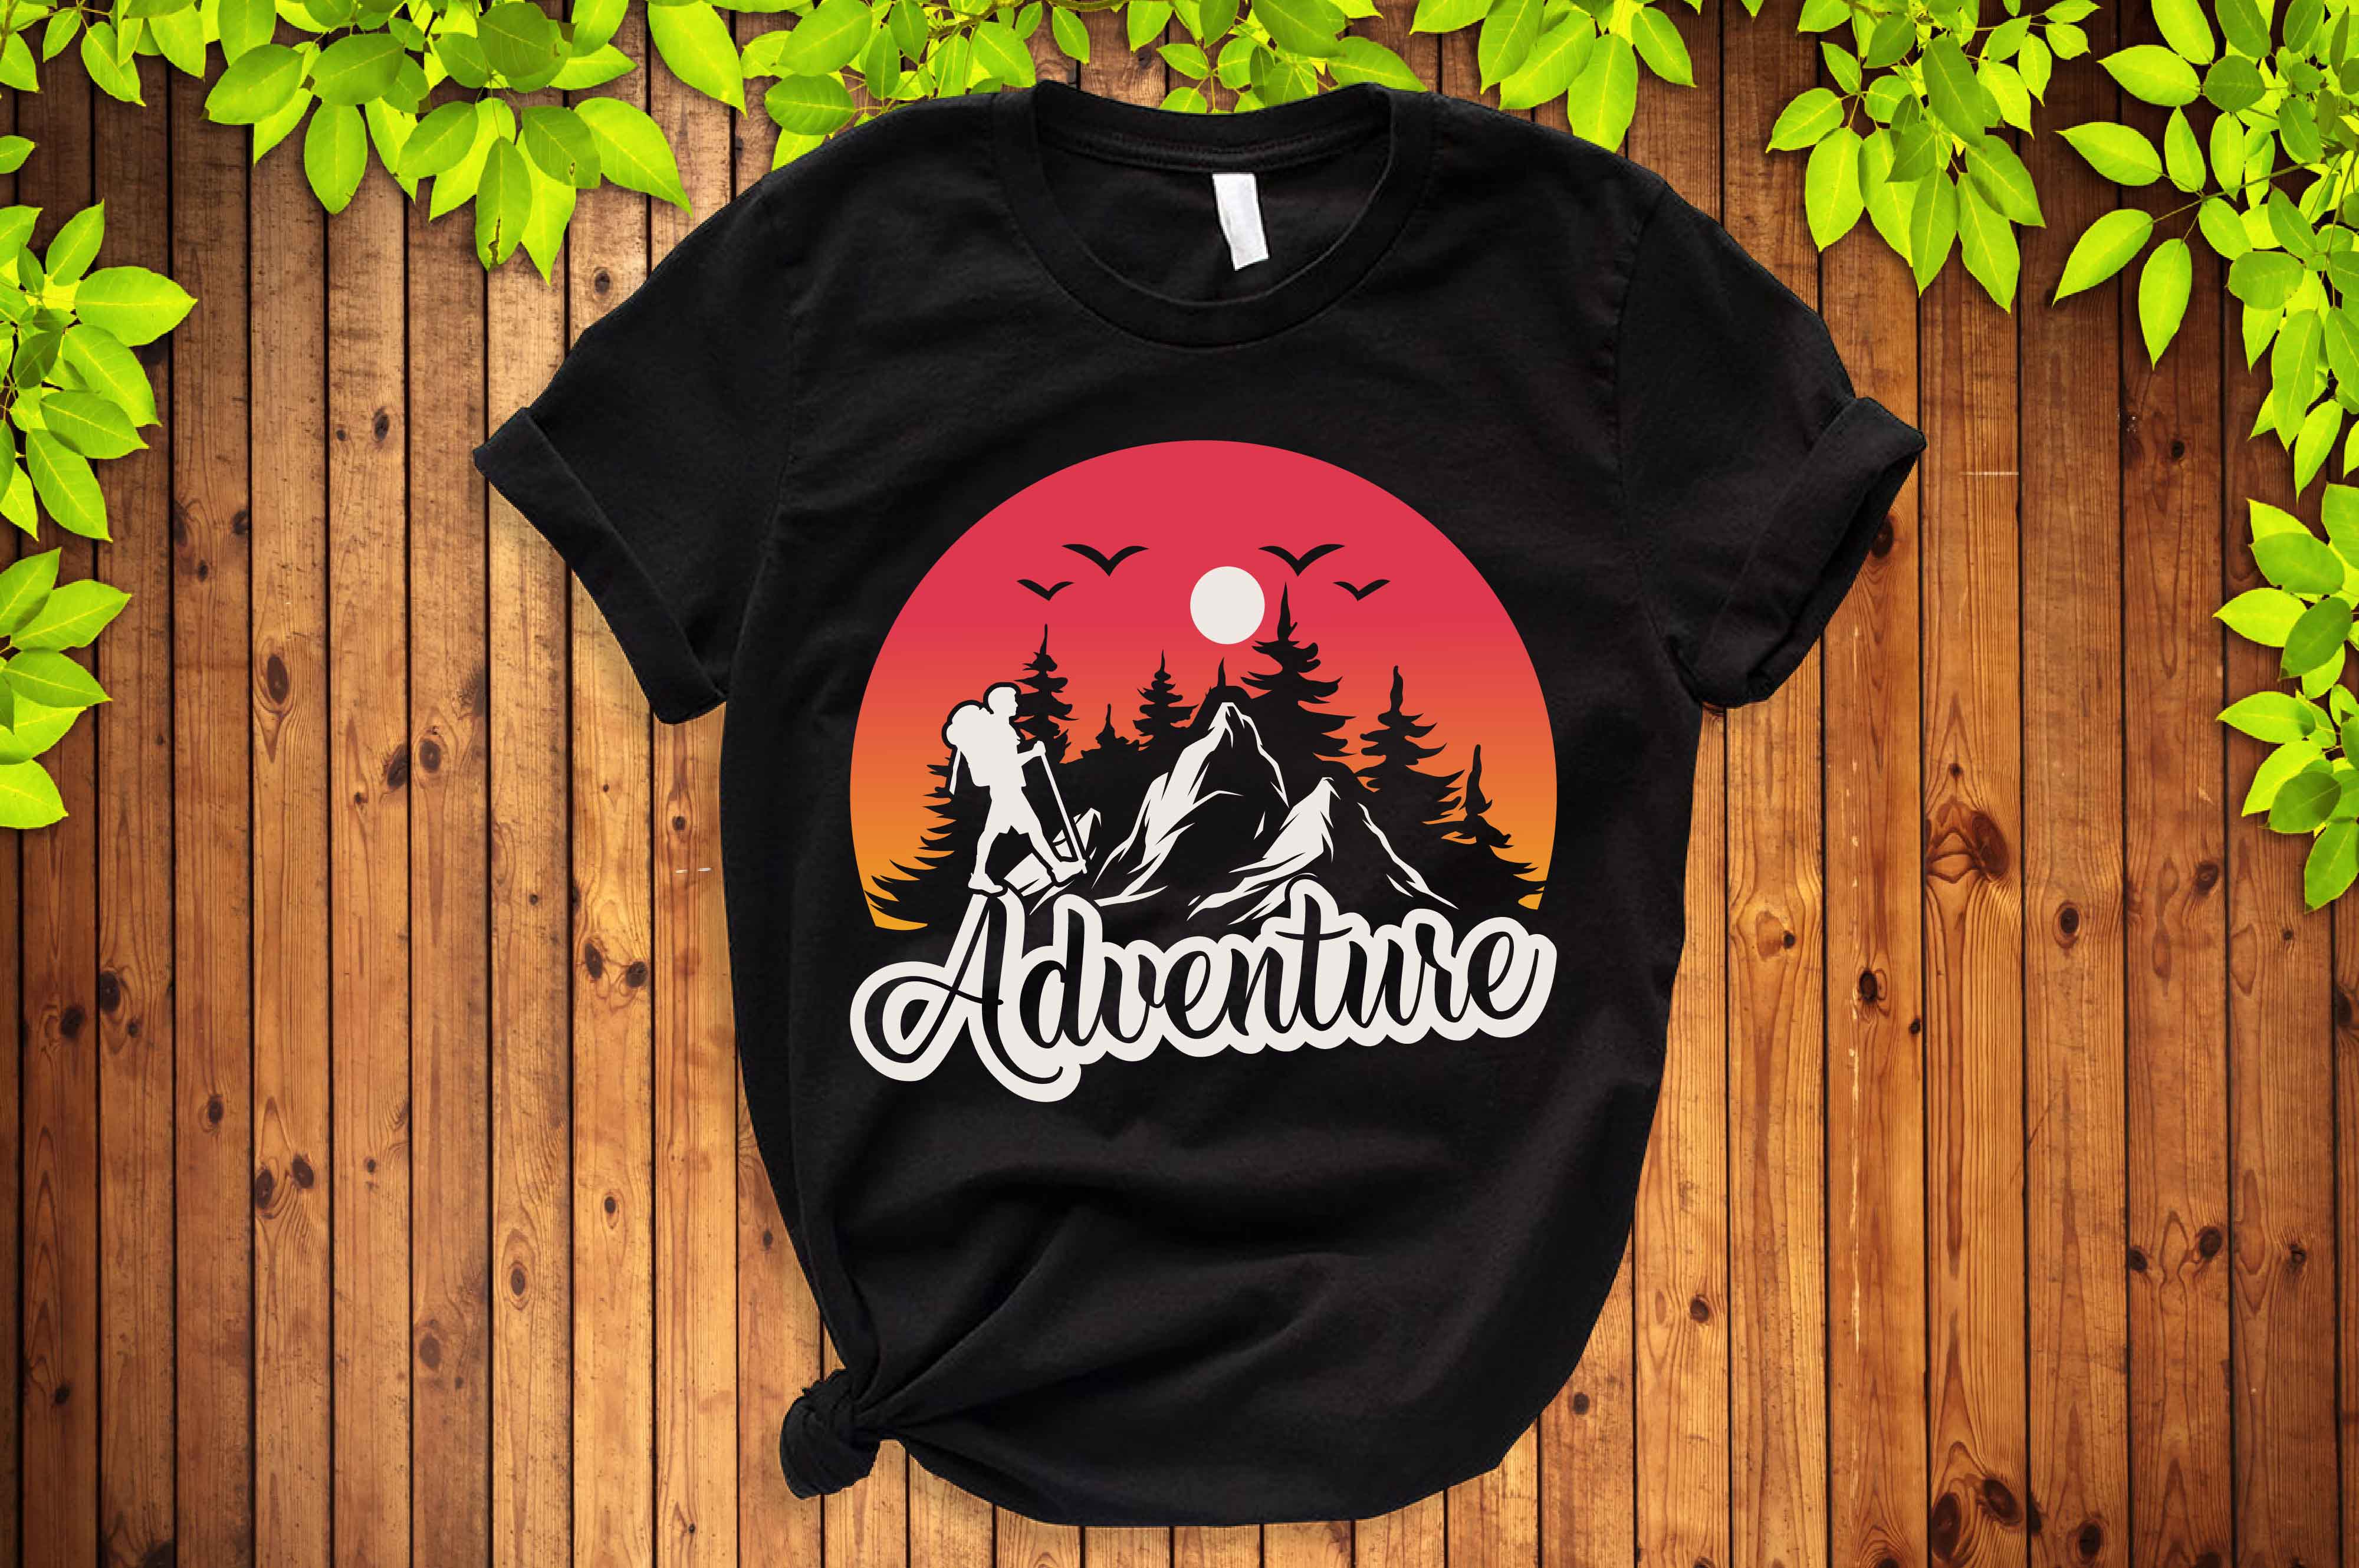 Black t - shirt with the words adventure printed on it.